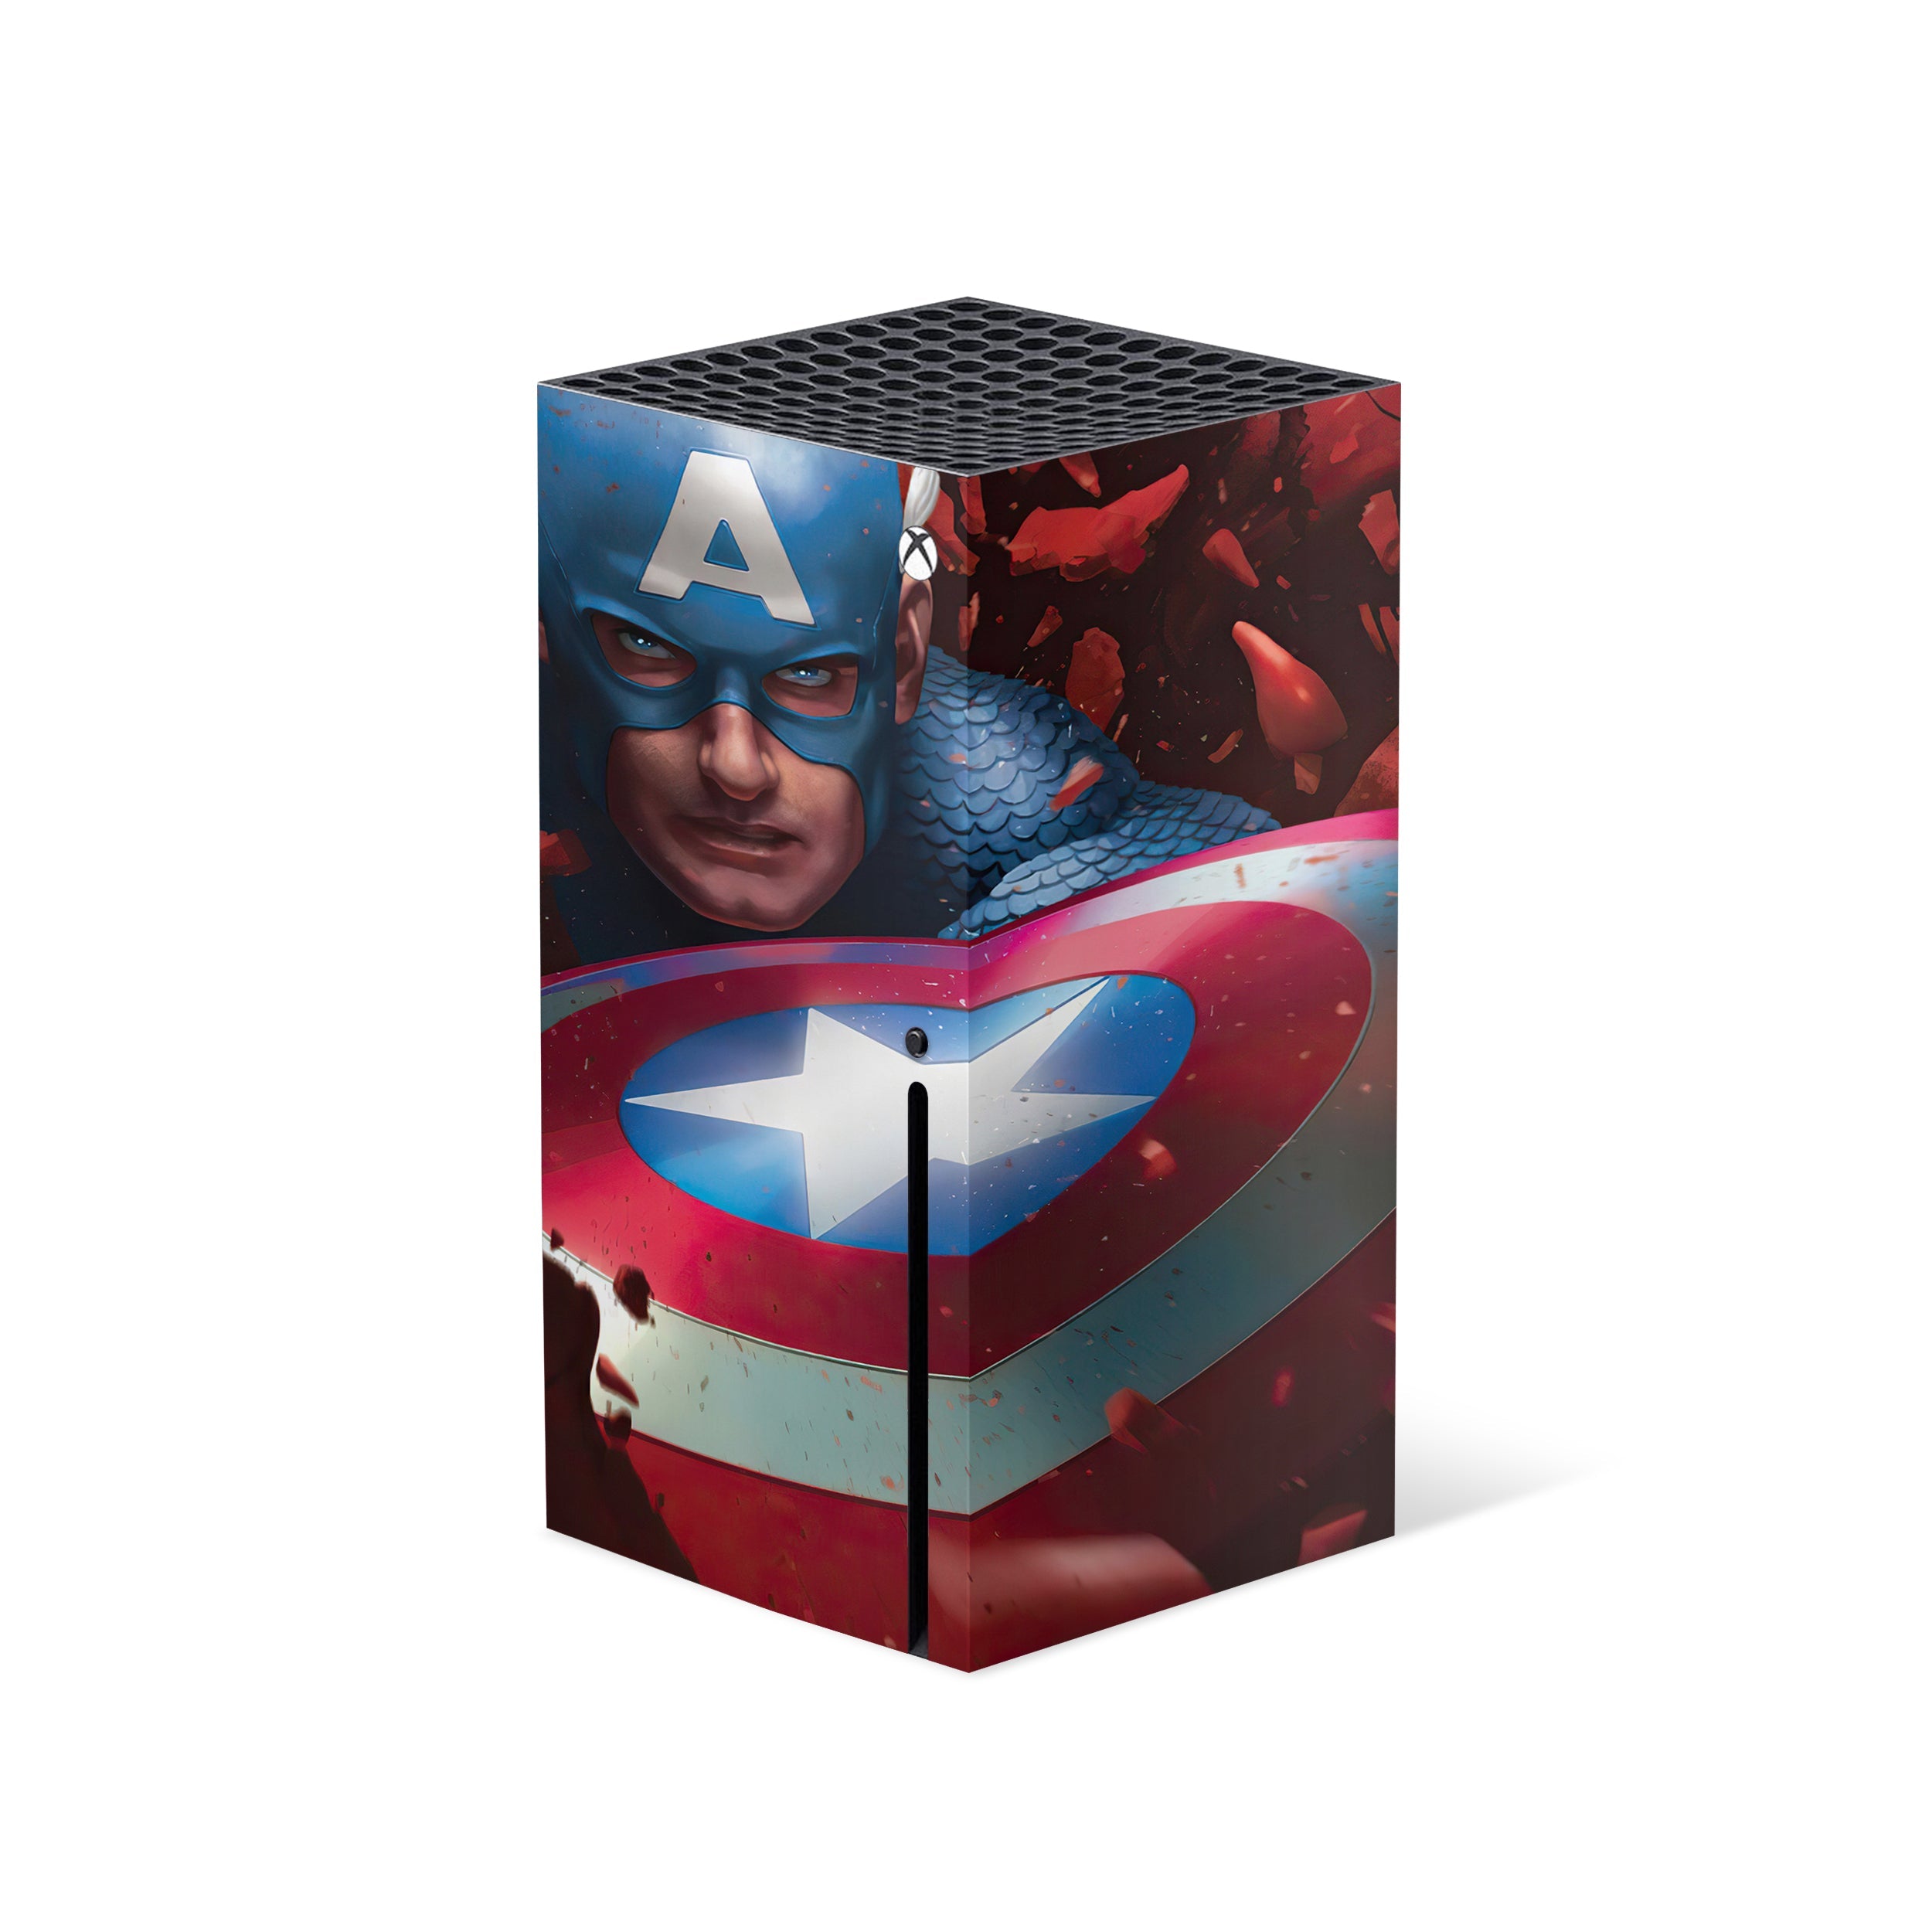 A video game skin featuring a Marvel Comics Captain America design for the Xbox Series X.